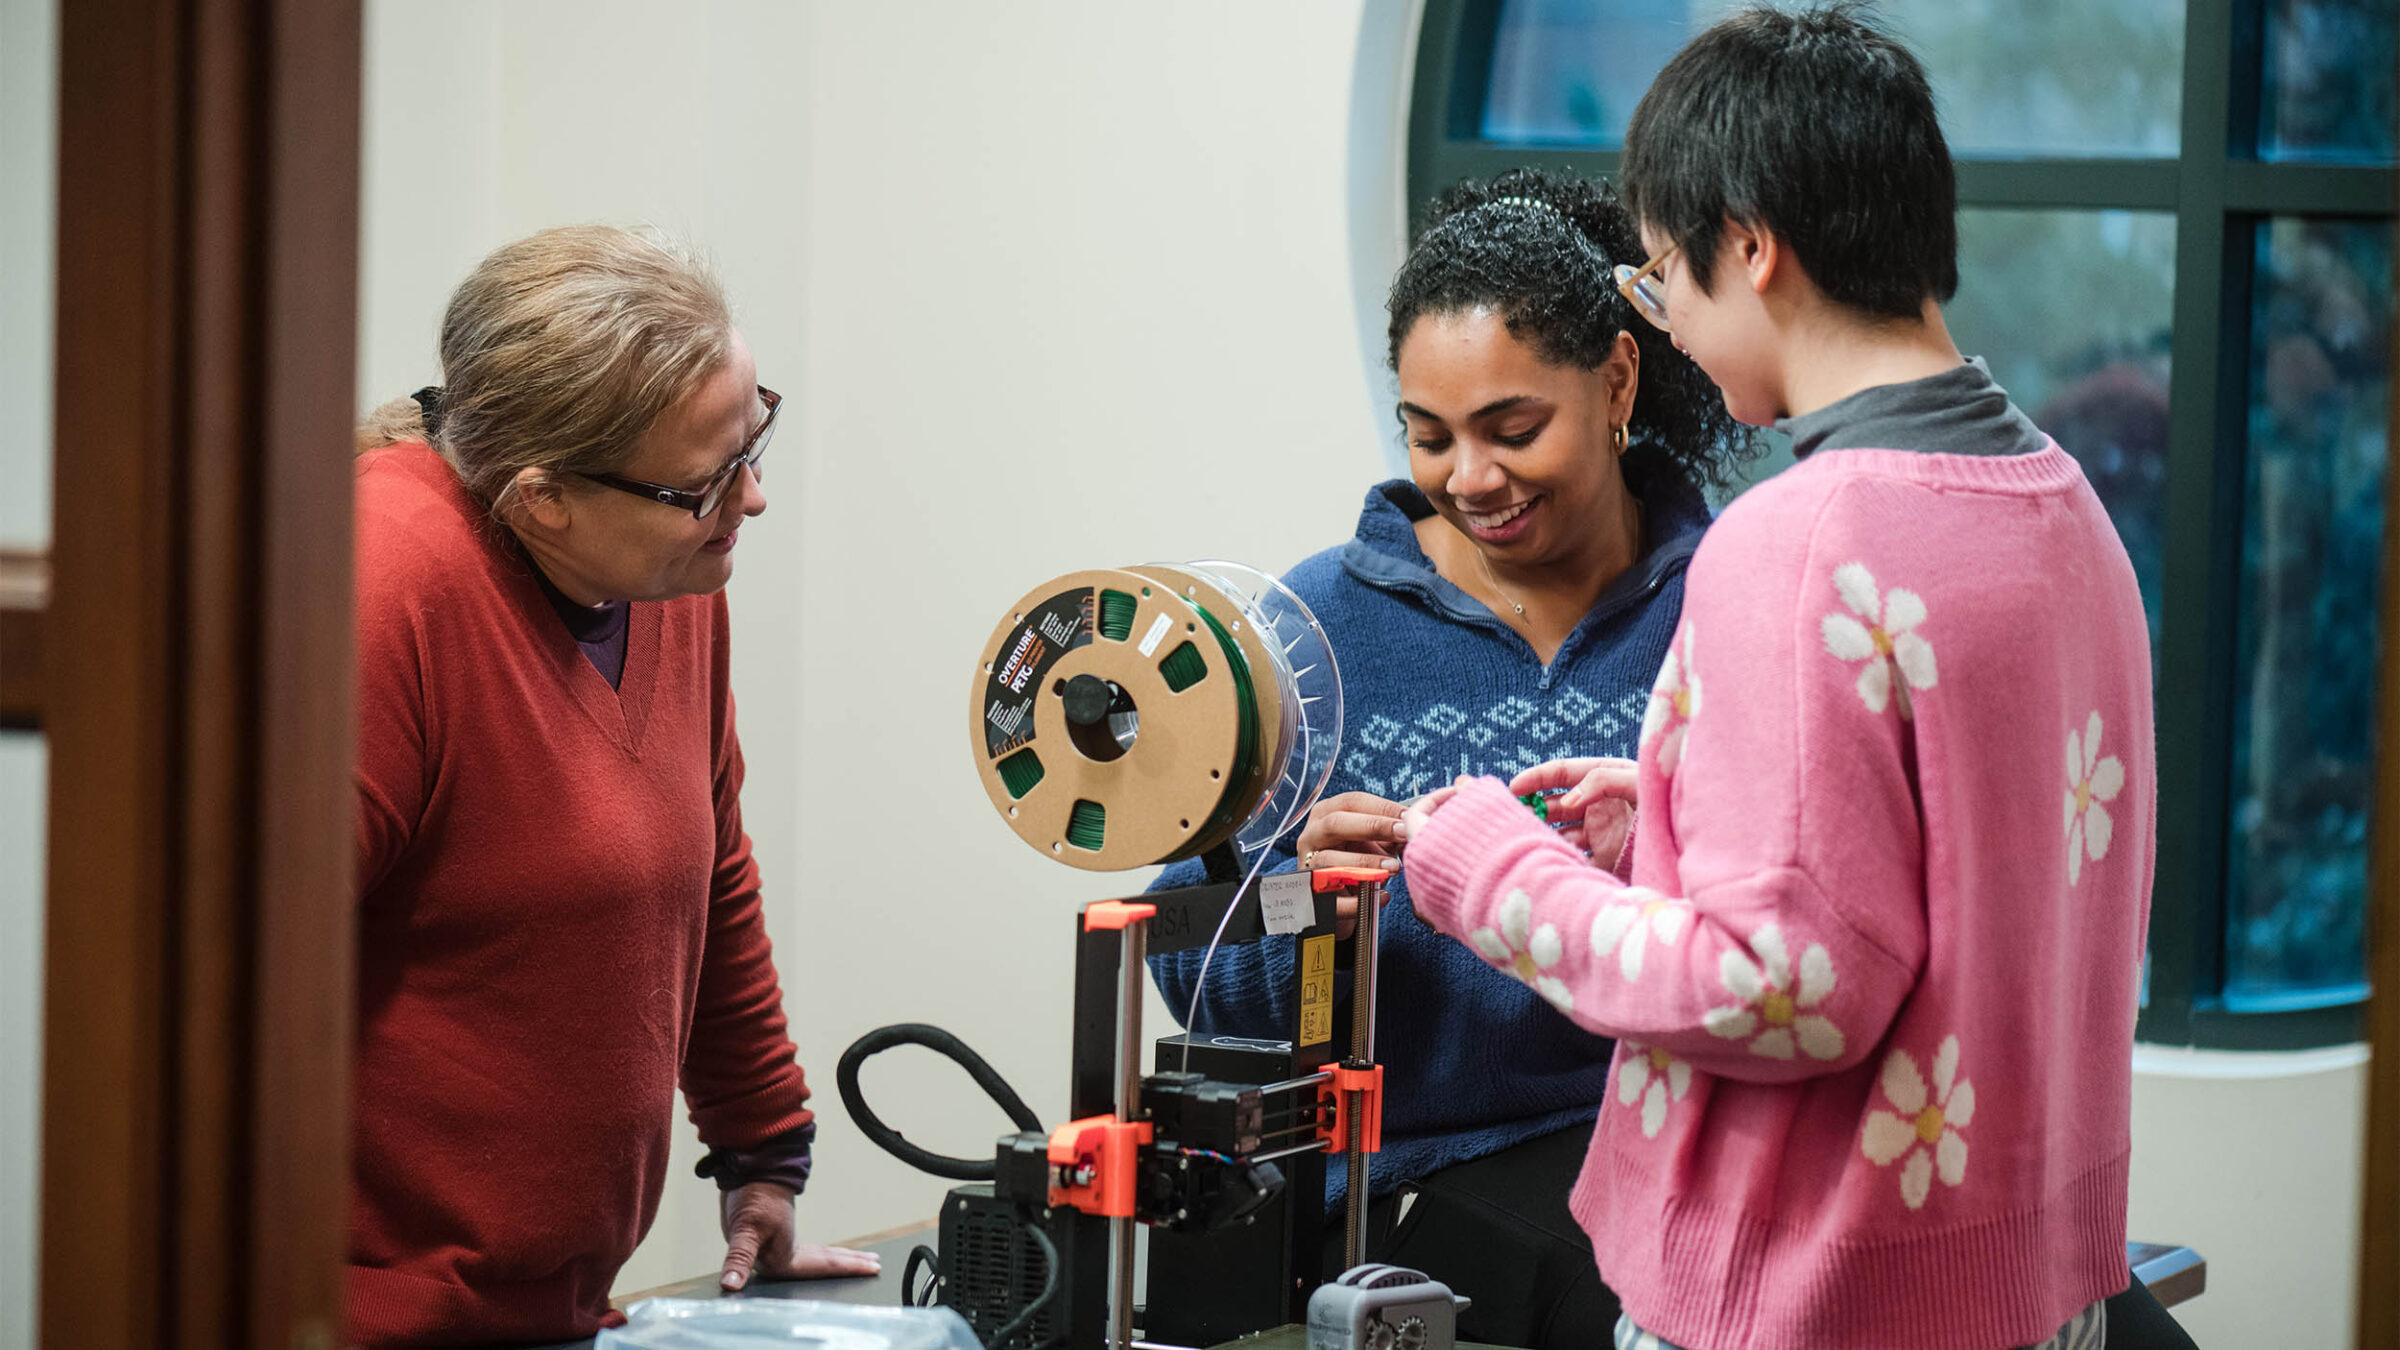 Students and an instructor working on a 3D printed project